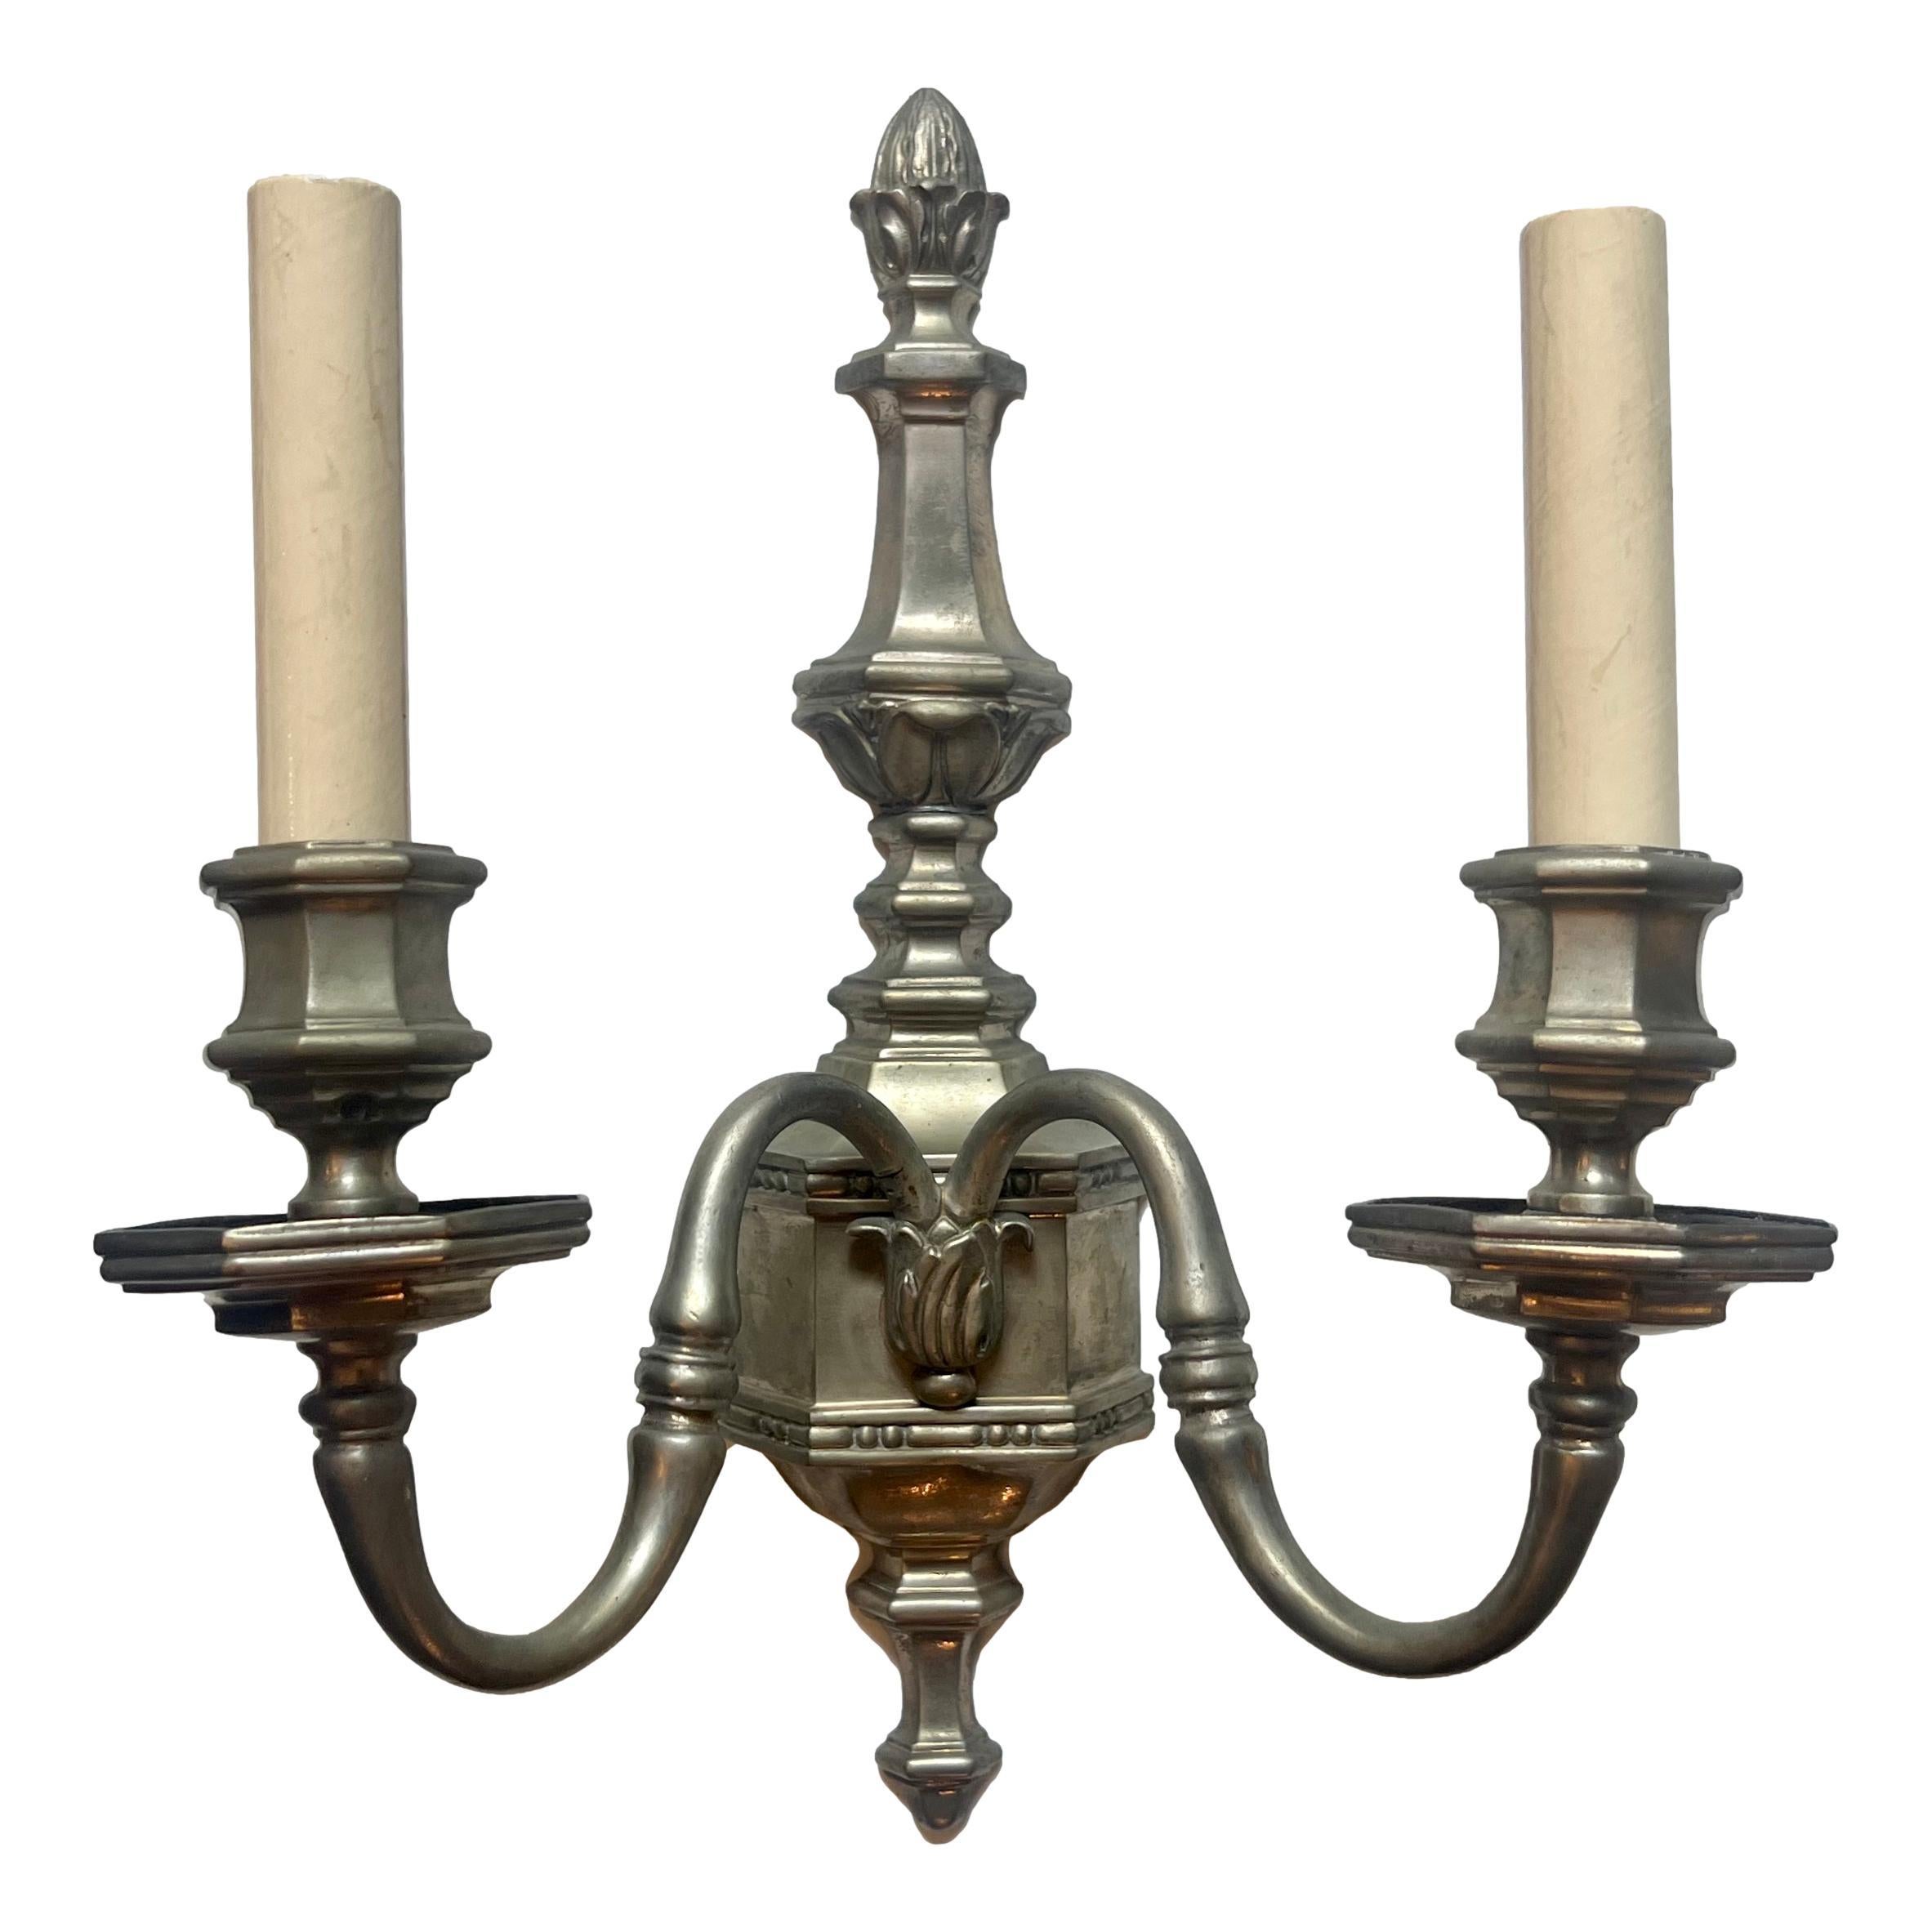 Pair of circa 1920's American silver-plated sconces with original finish.

Measurements:
Height: 14